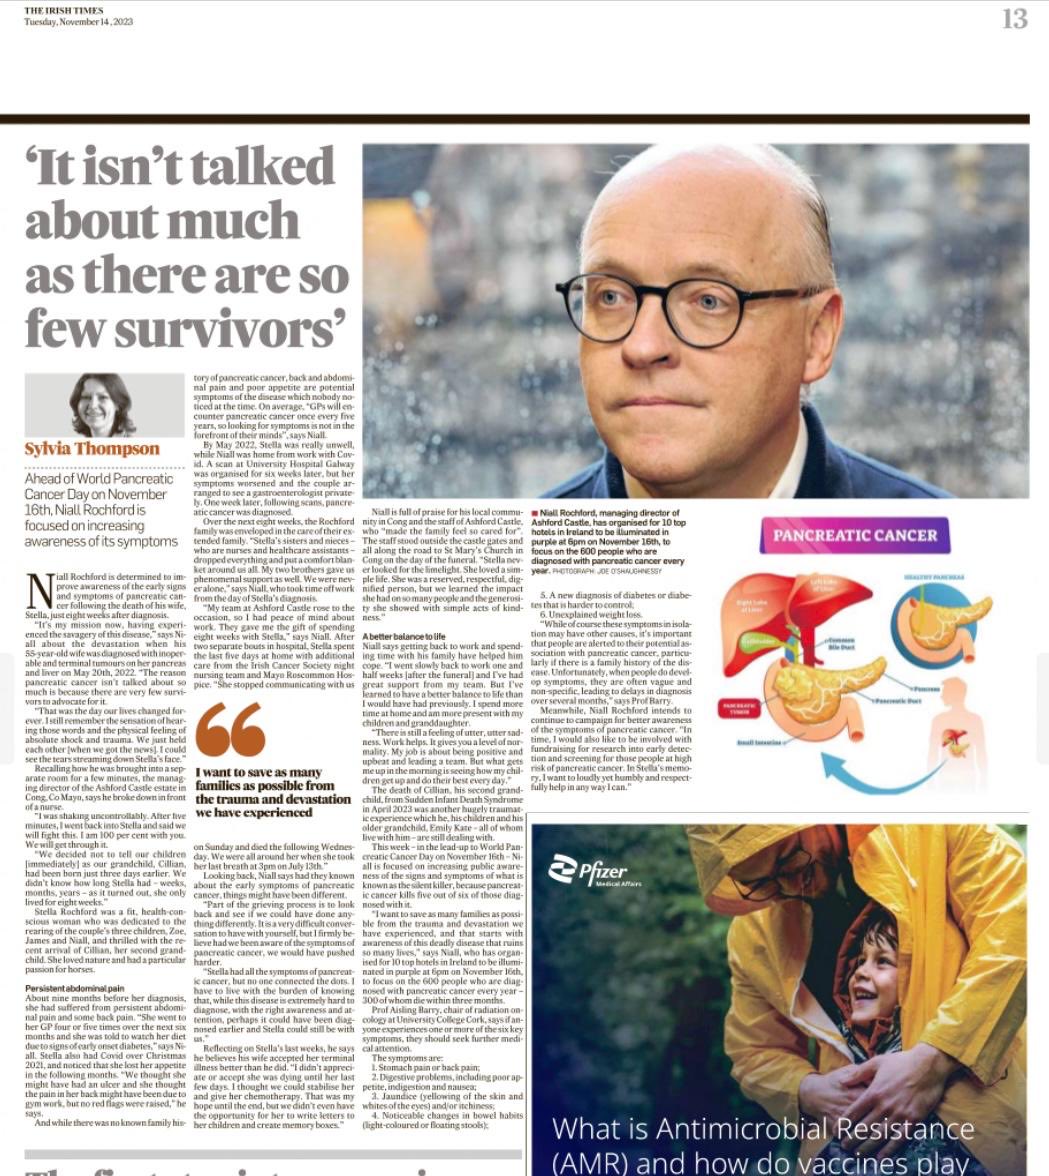 Thank you ⁦@sthompsonIT⁩ and ⁦@IrishTimes⁩ for helping me tell Stella’s story very sensitively! Thank you also for highlighting the symptoms of pancreatic cancer and the importance of early detection #PancreaticCancerIreland #5in6 #WPCD #HelloPancreas